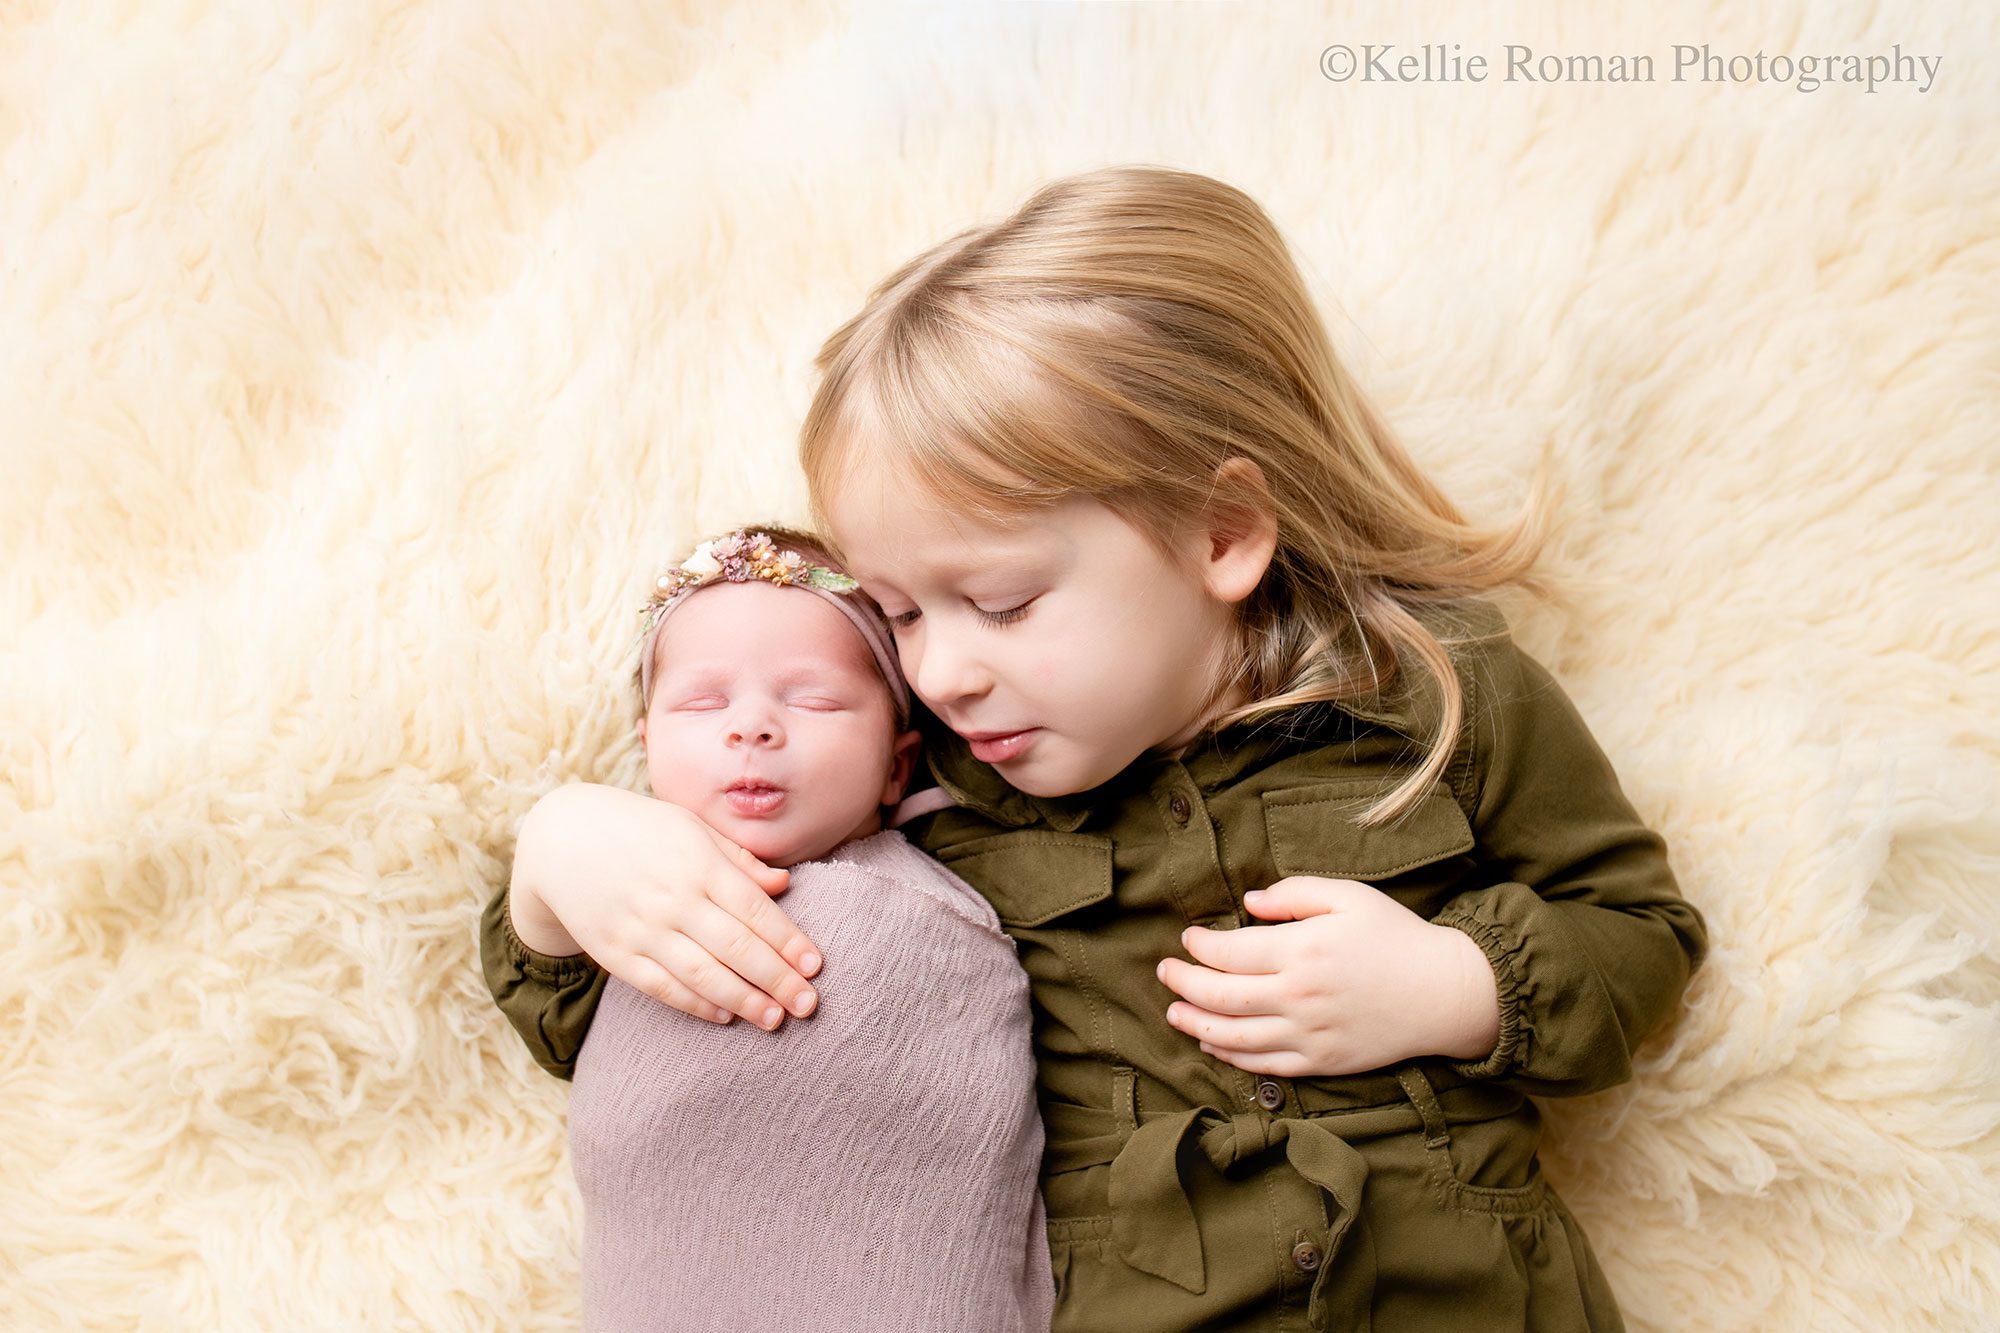 milwaukee newborn photography studio. two girls are laying on a cream fur rug. three year old has her arm around newborn sister. older girl has an olive green dress on, newborn girl is swaddled in a purple wrap with a floral headband. 